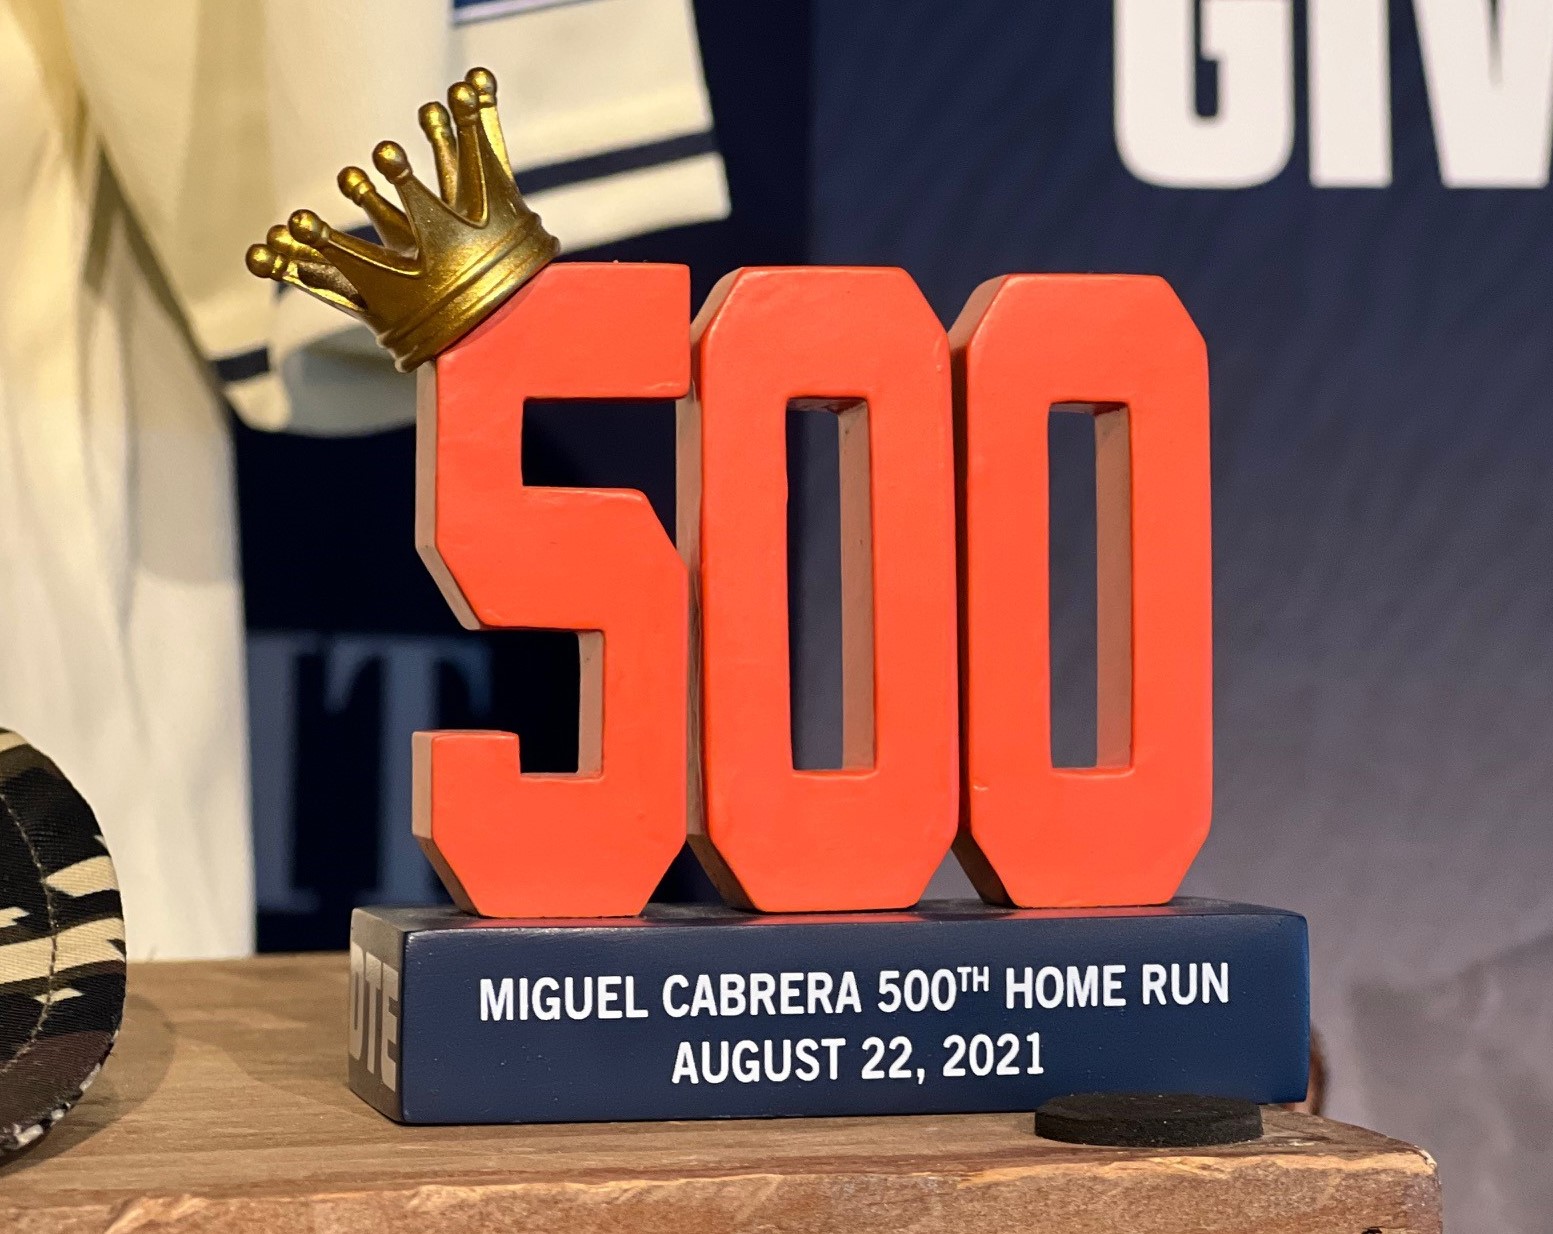 Detroit Tigers new merchandise and gameday freebies for the 2022